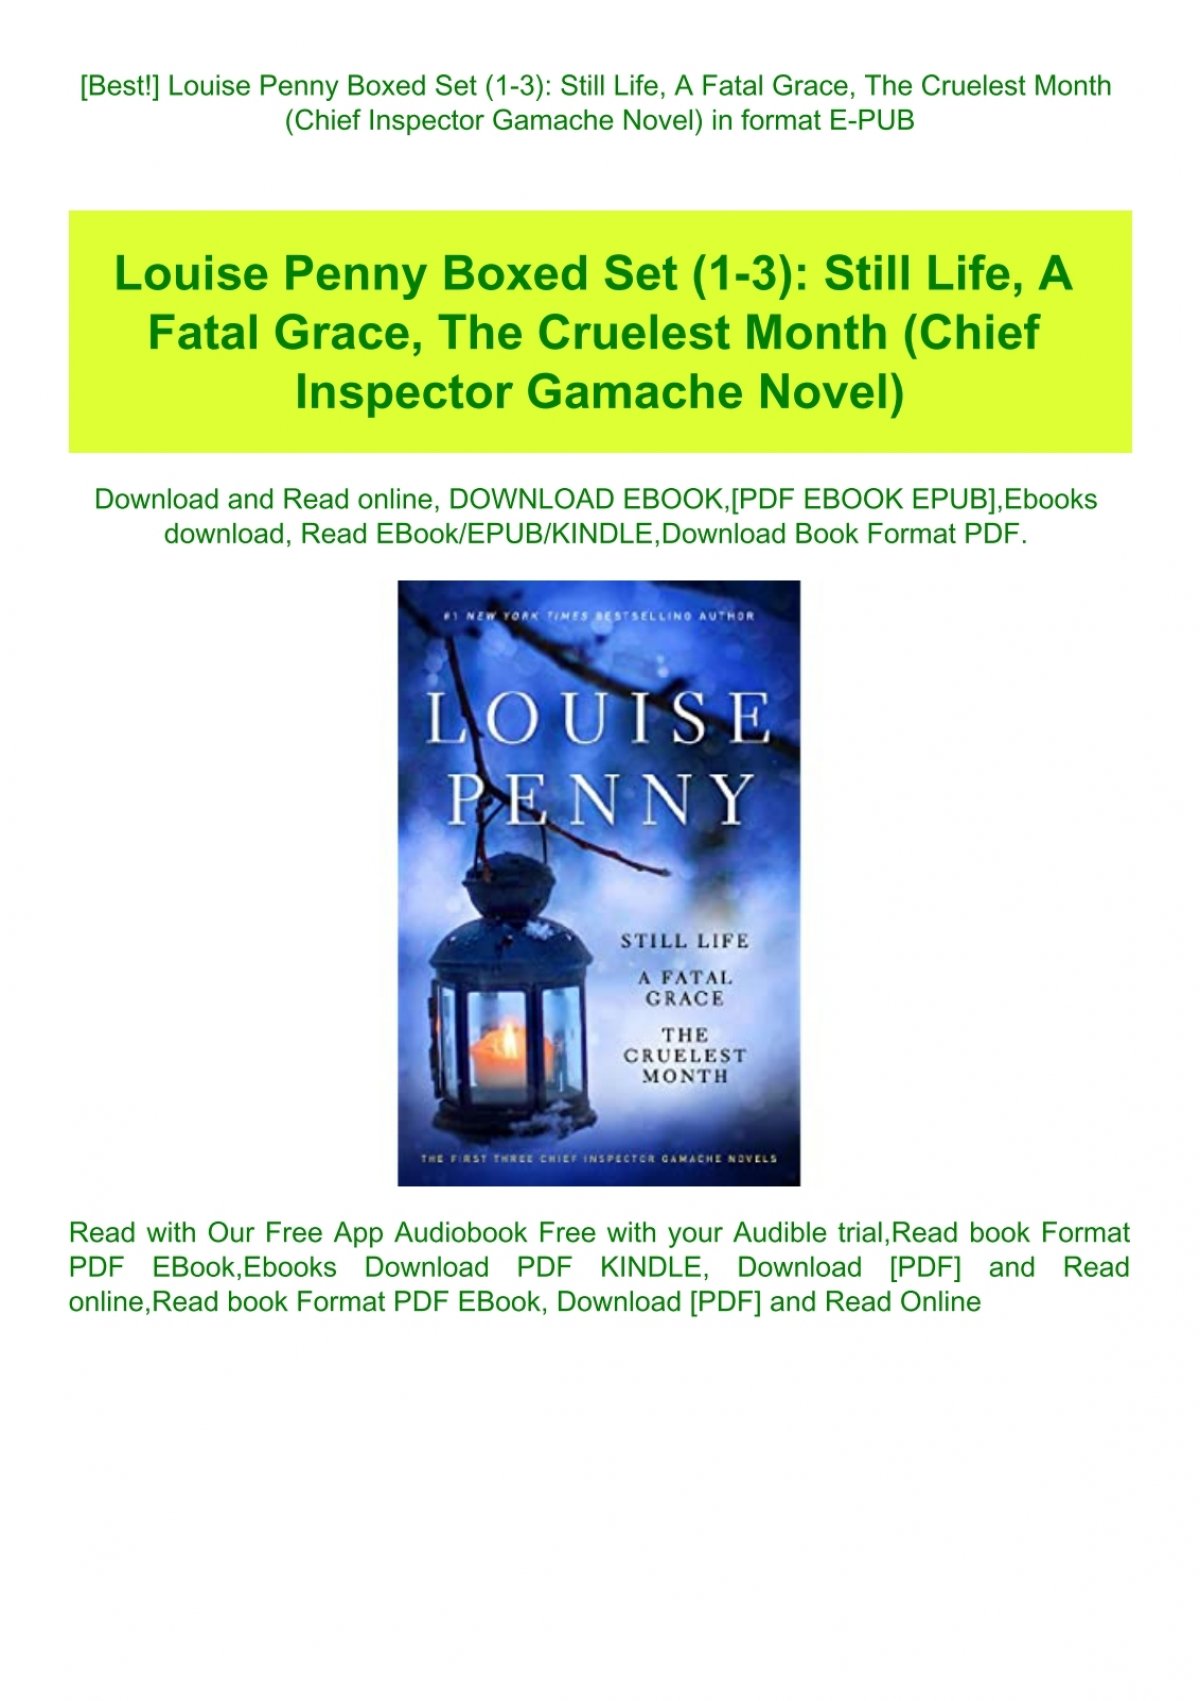 Still Life Audiobook by Louise Penny - Free Sample